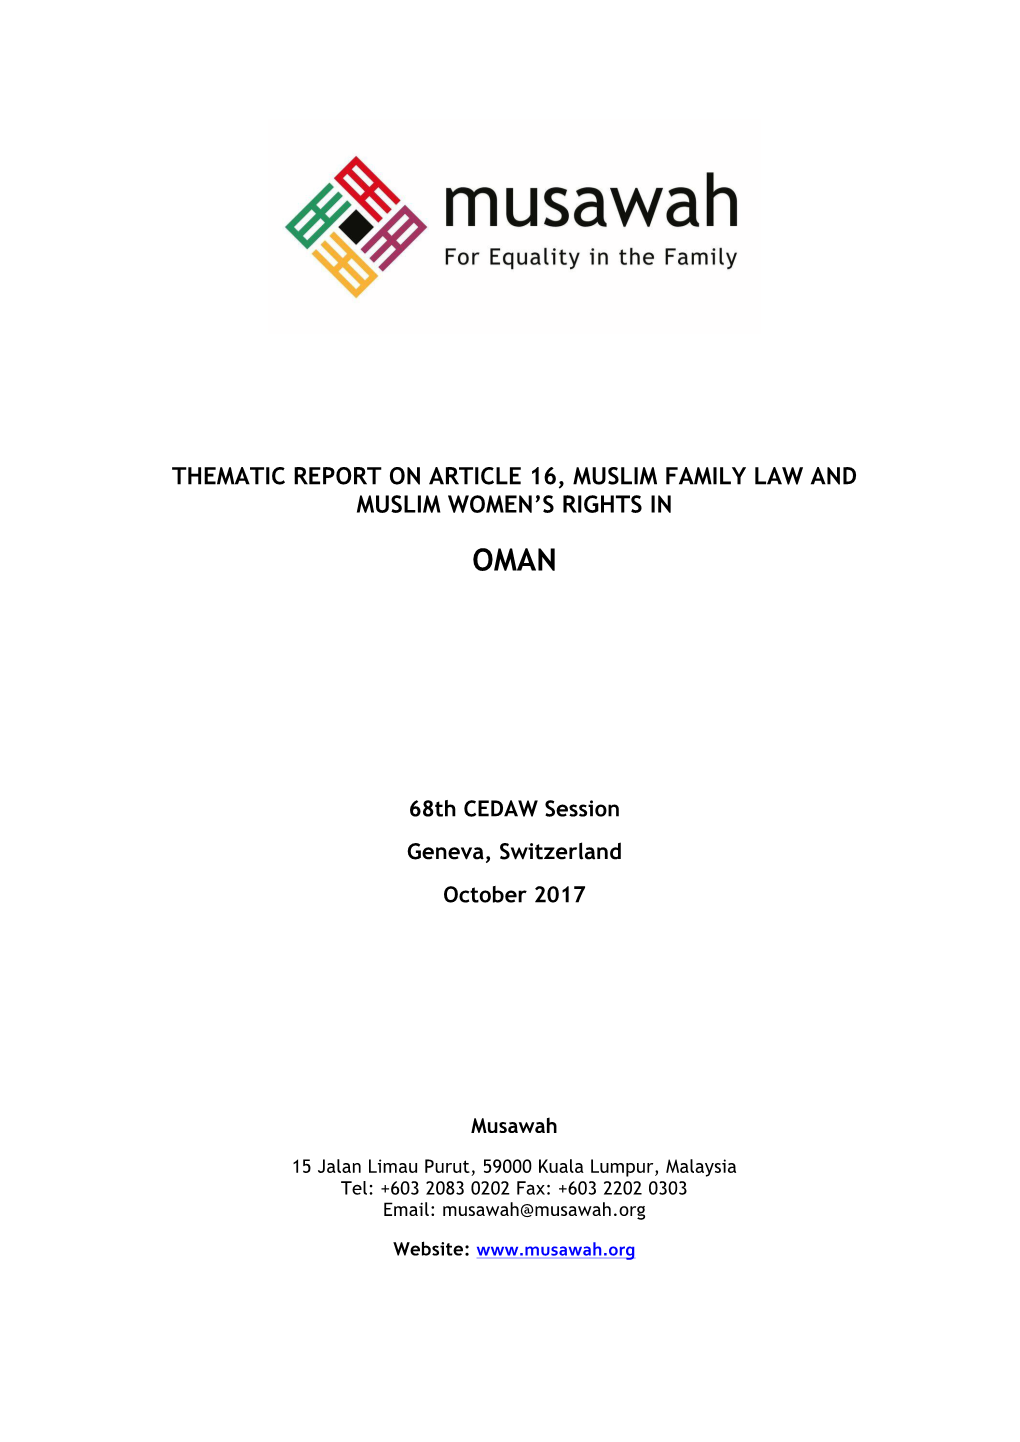 Thematic Report on Article 16, Muslim Family Law and Muslim Women’S Rights in Oman